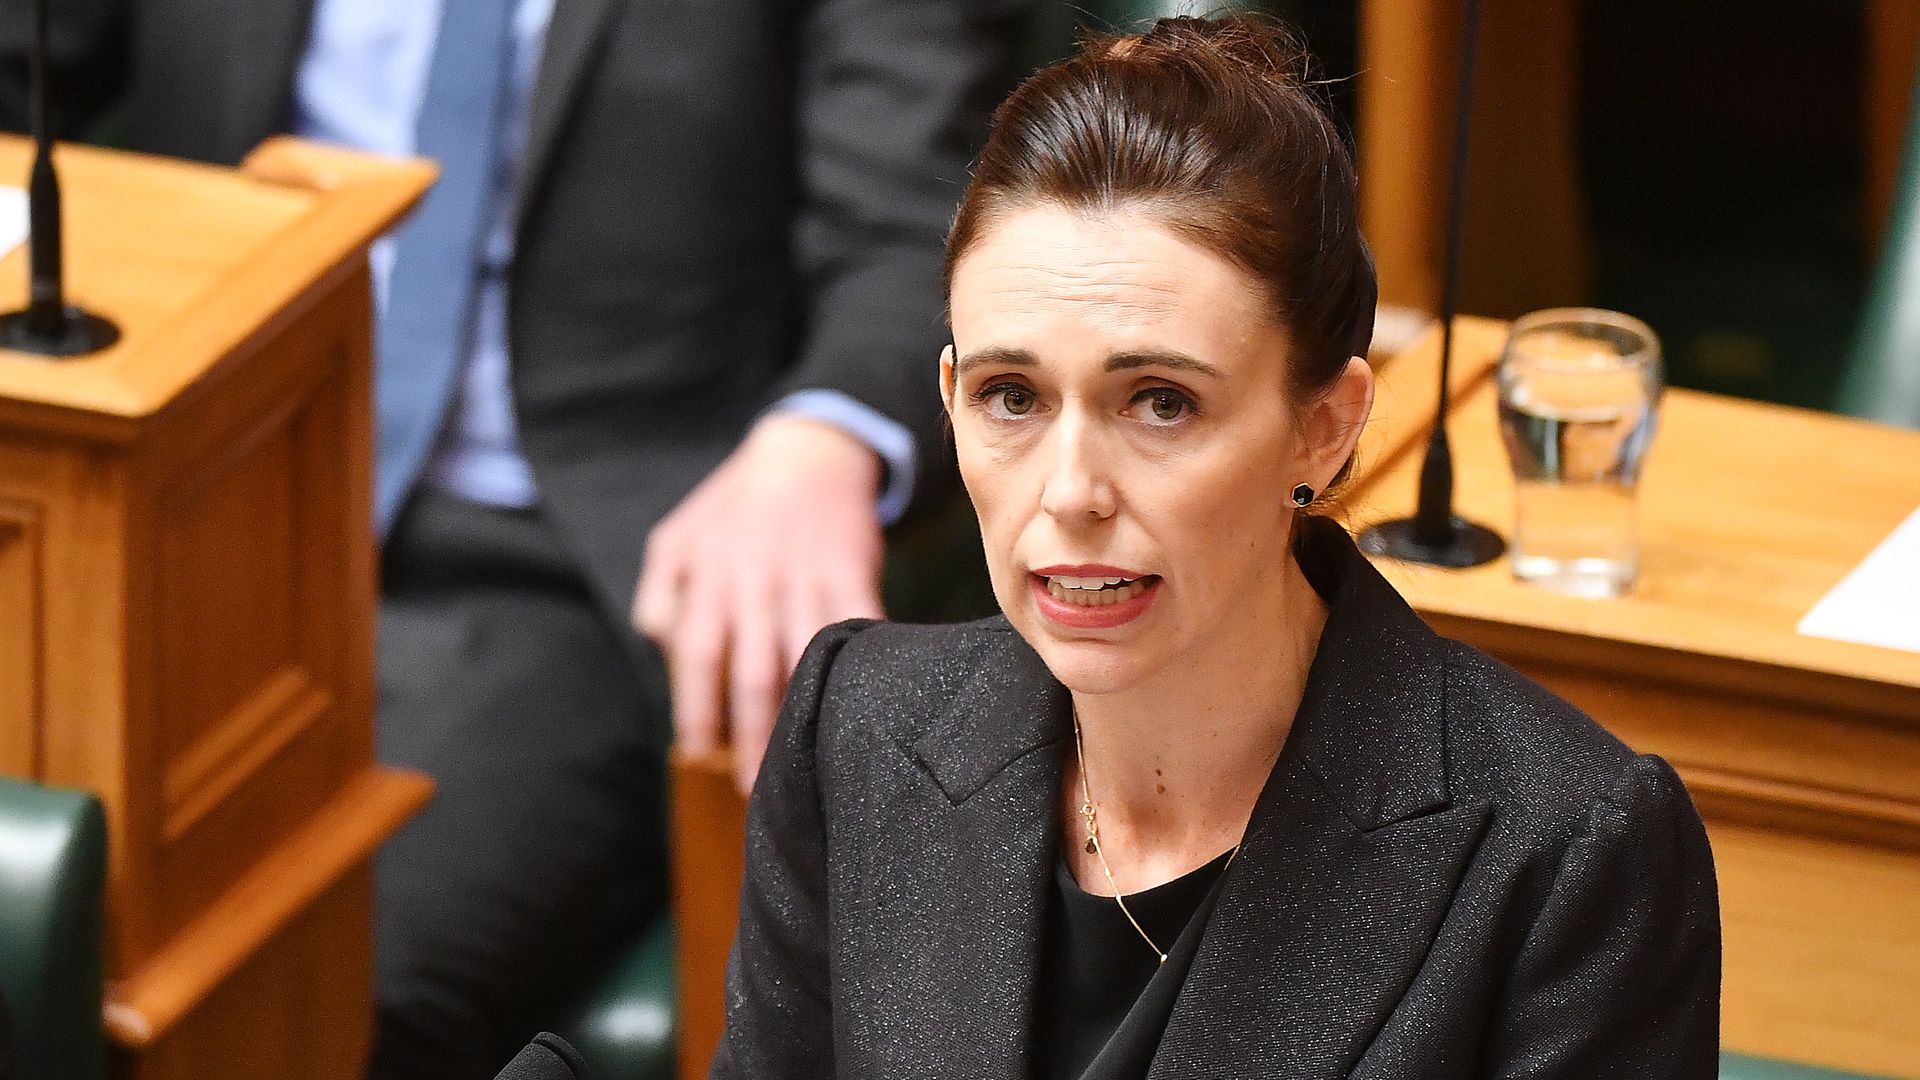 New Zealand Prime Minister Jacinda Ardern pays tribute to the mosque attack victims in Parliament.